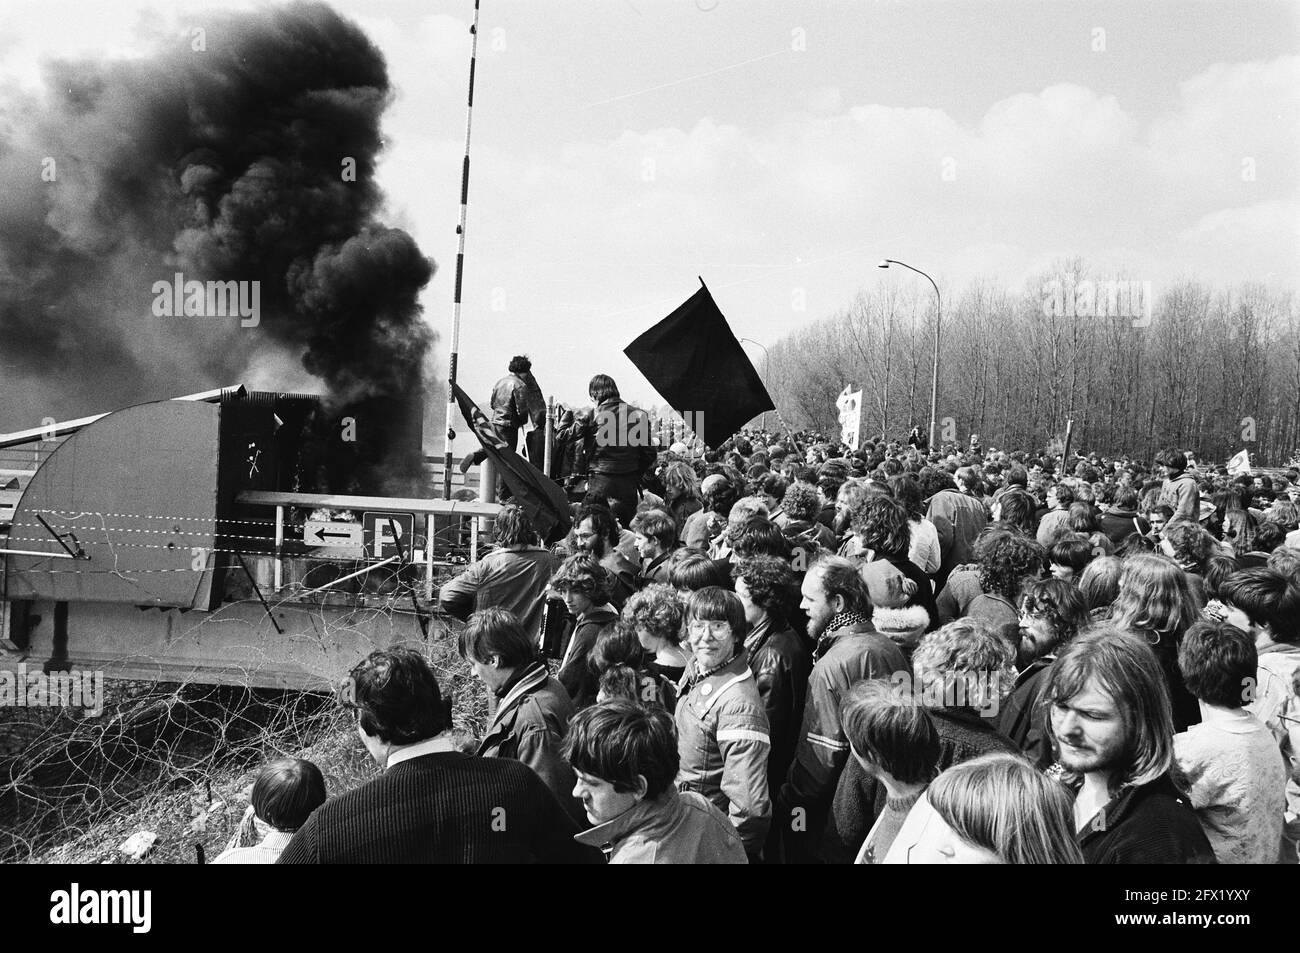 Last match in stadium Galgenwaard in Utrecht, FC Utrecht against PSV, game moments, 20 April 1981, sports, soccer, The Netherlands, 20th century press agency photo, news to remember, documentary, historic photography 1945-1990, visual stories, human history of the Twentieth Century, capturing moments in time Stock Photo